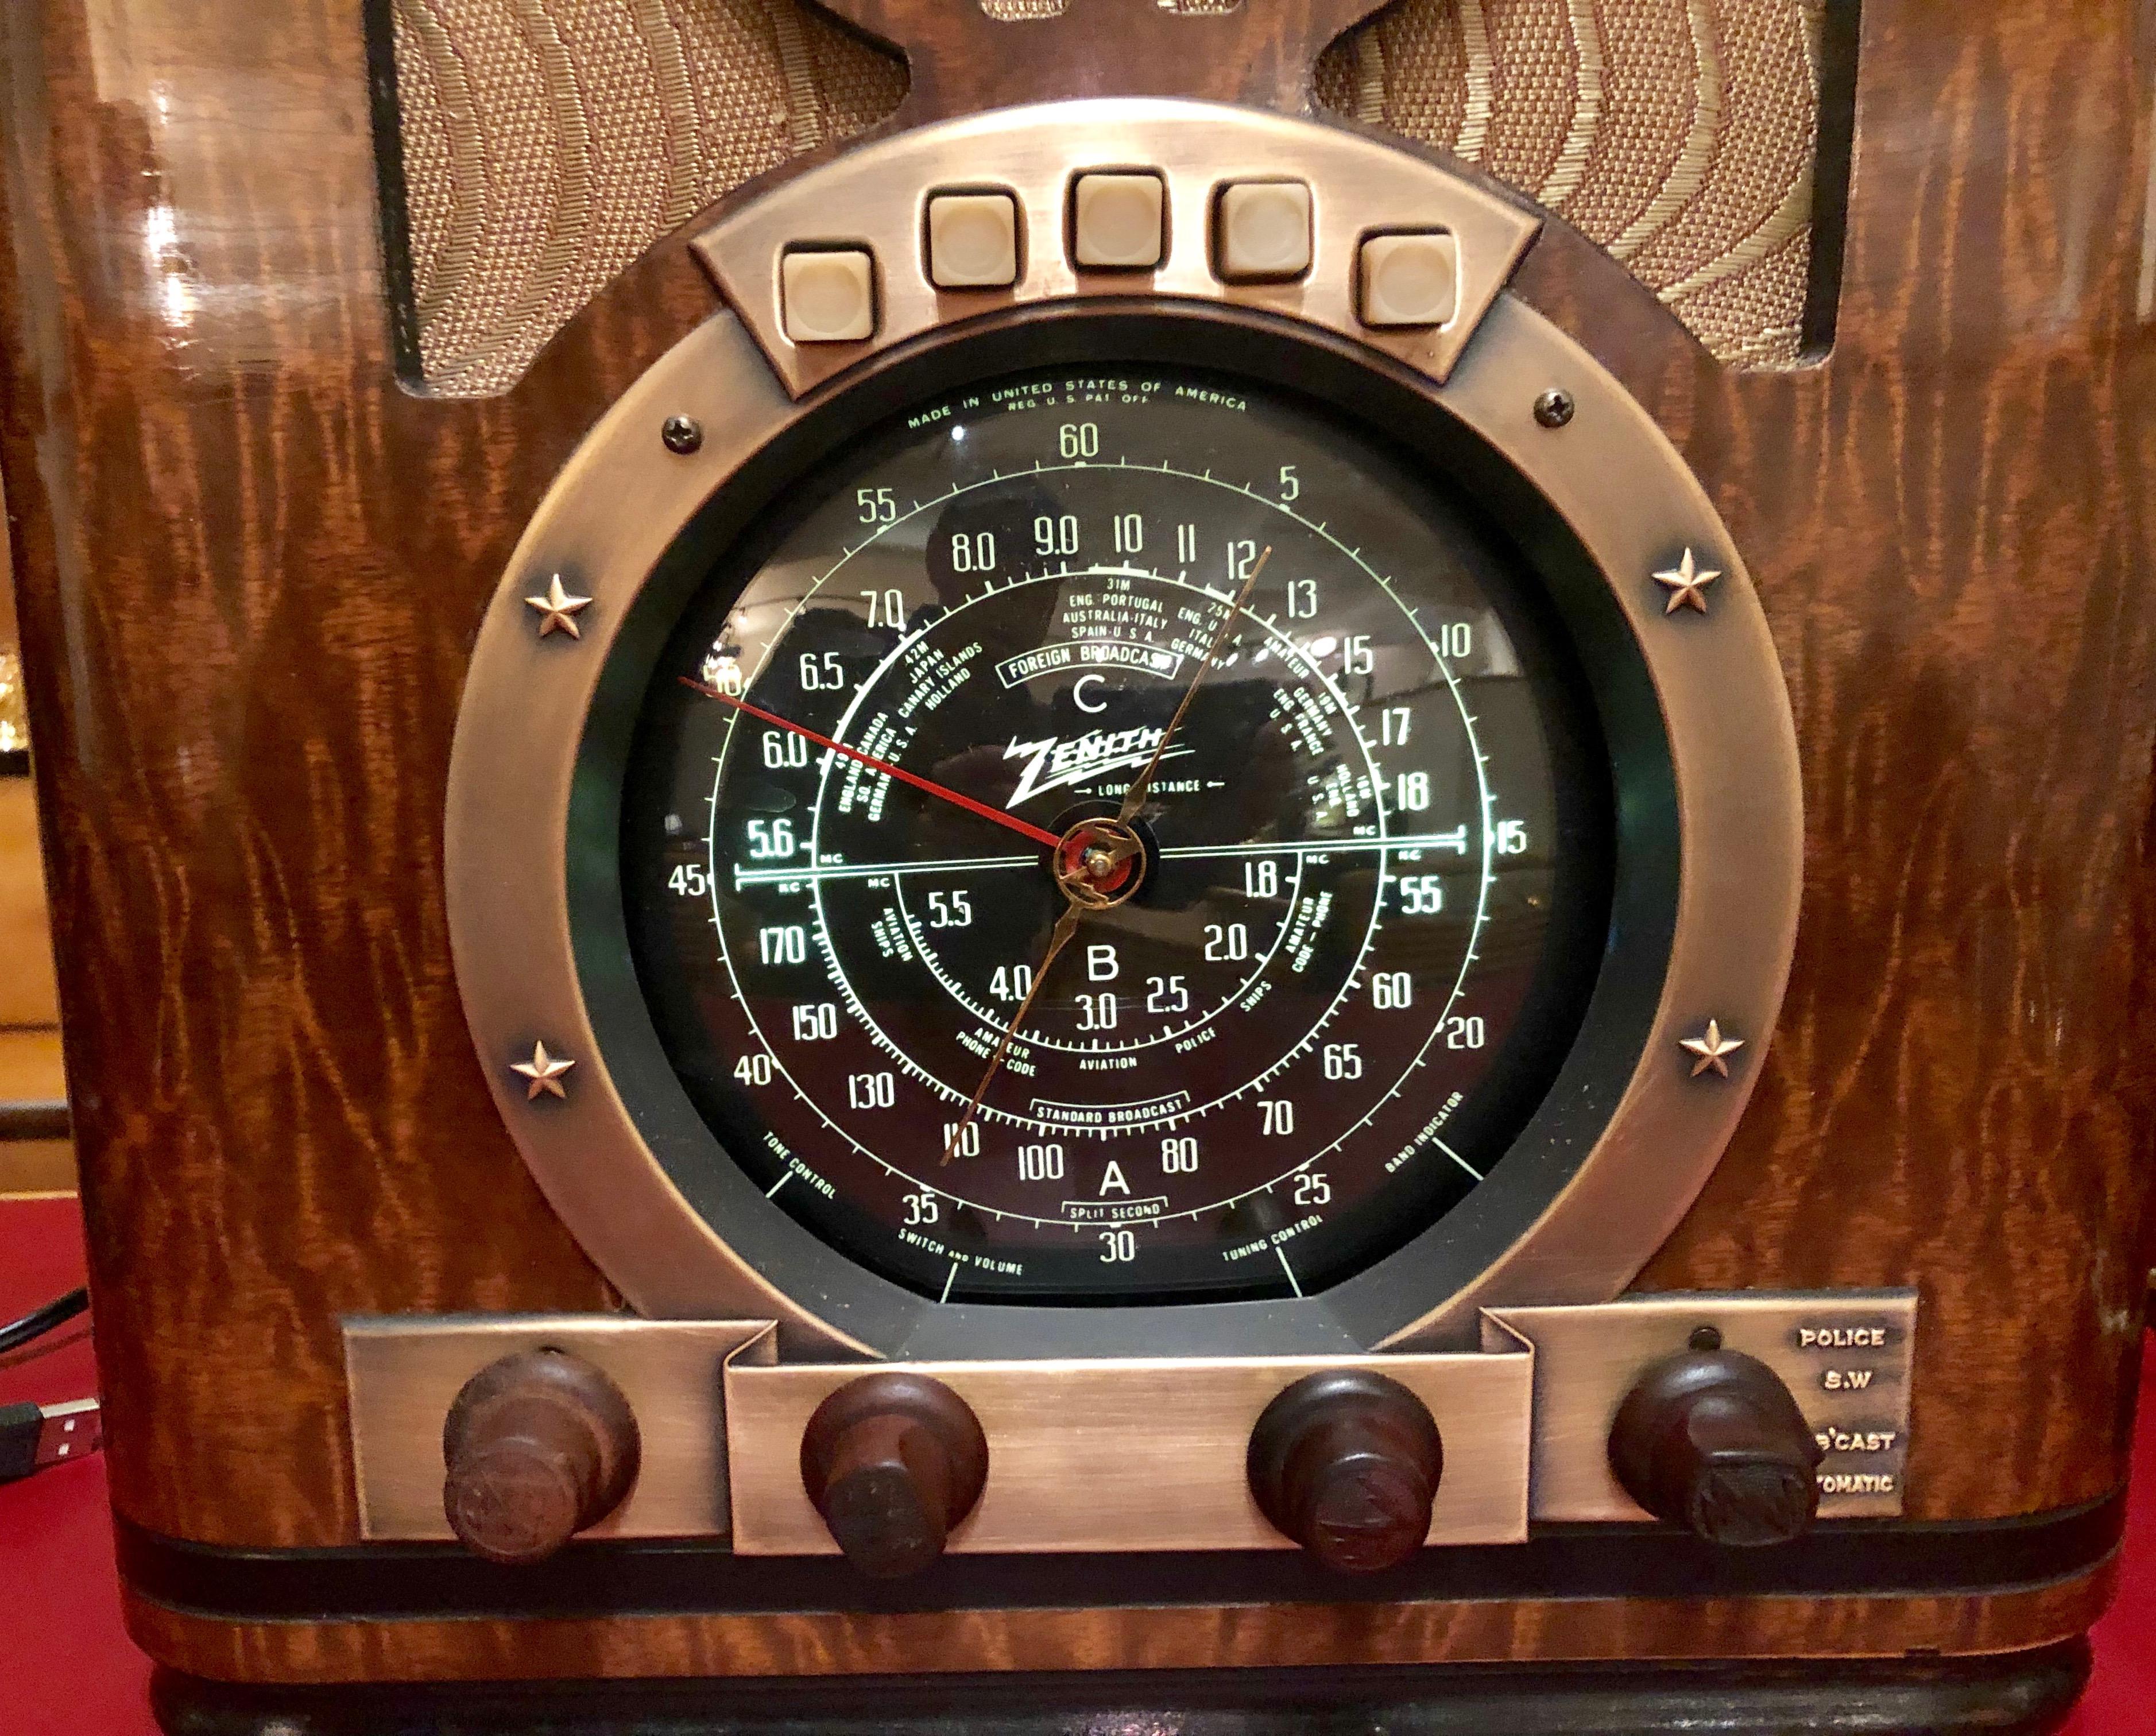 Original Zenith Radio model (1937) 6-S-330 Tombstone Black Dial Tube Radio and Bluetooth. Fully restored mechanically and cosmetically as seen in the photos listed. This Art Deco period radio was part of the Glory Years 1936-1945 of Zenith radio